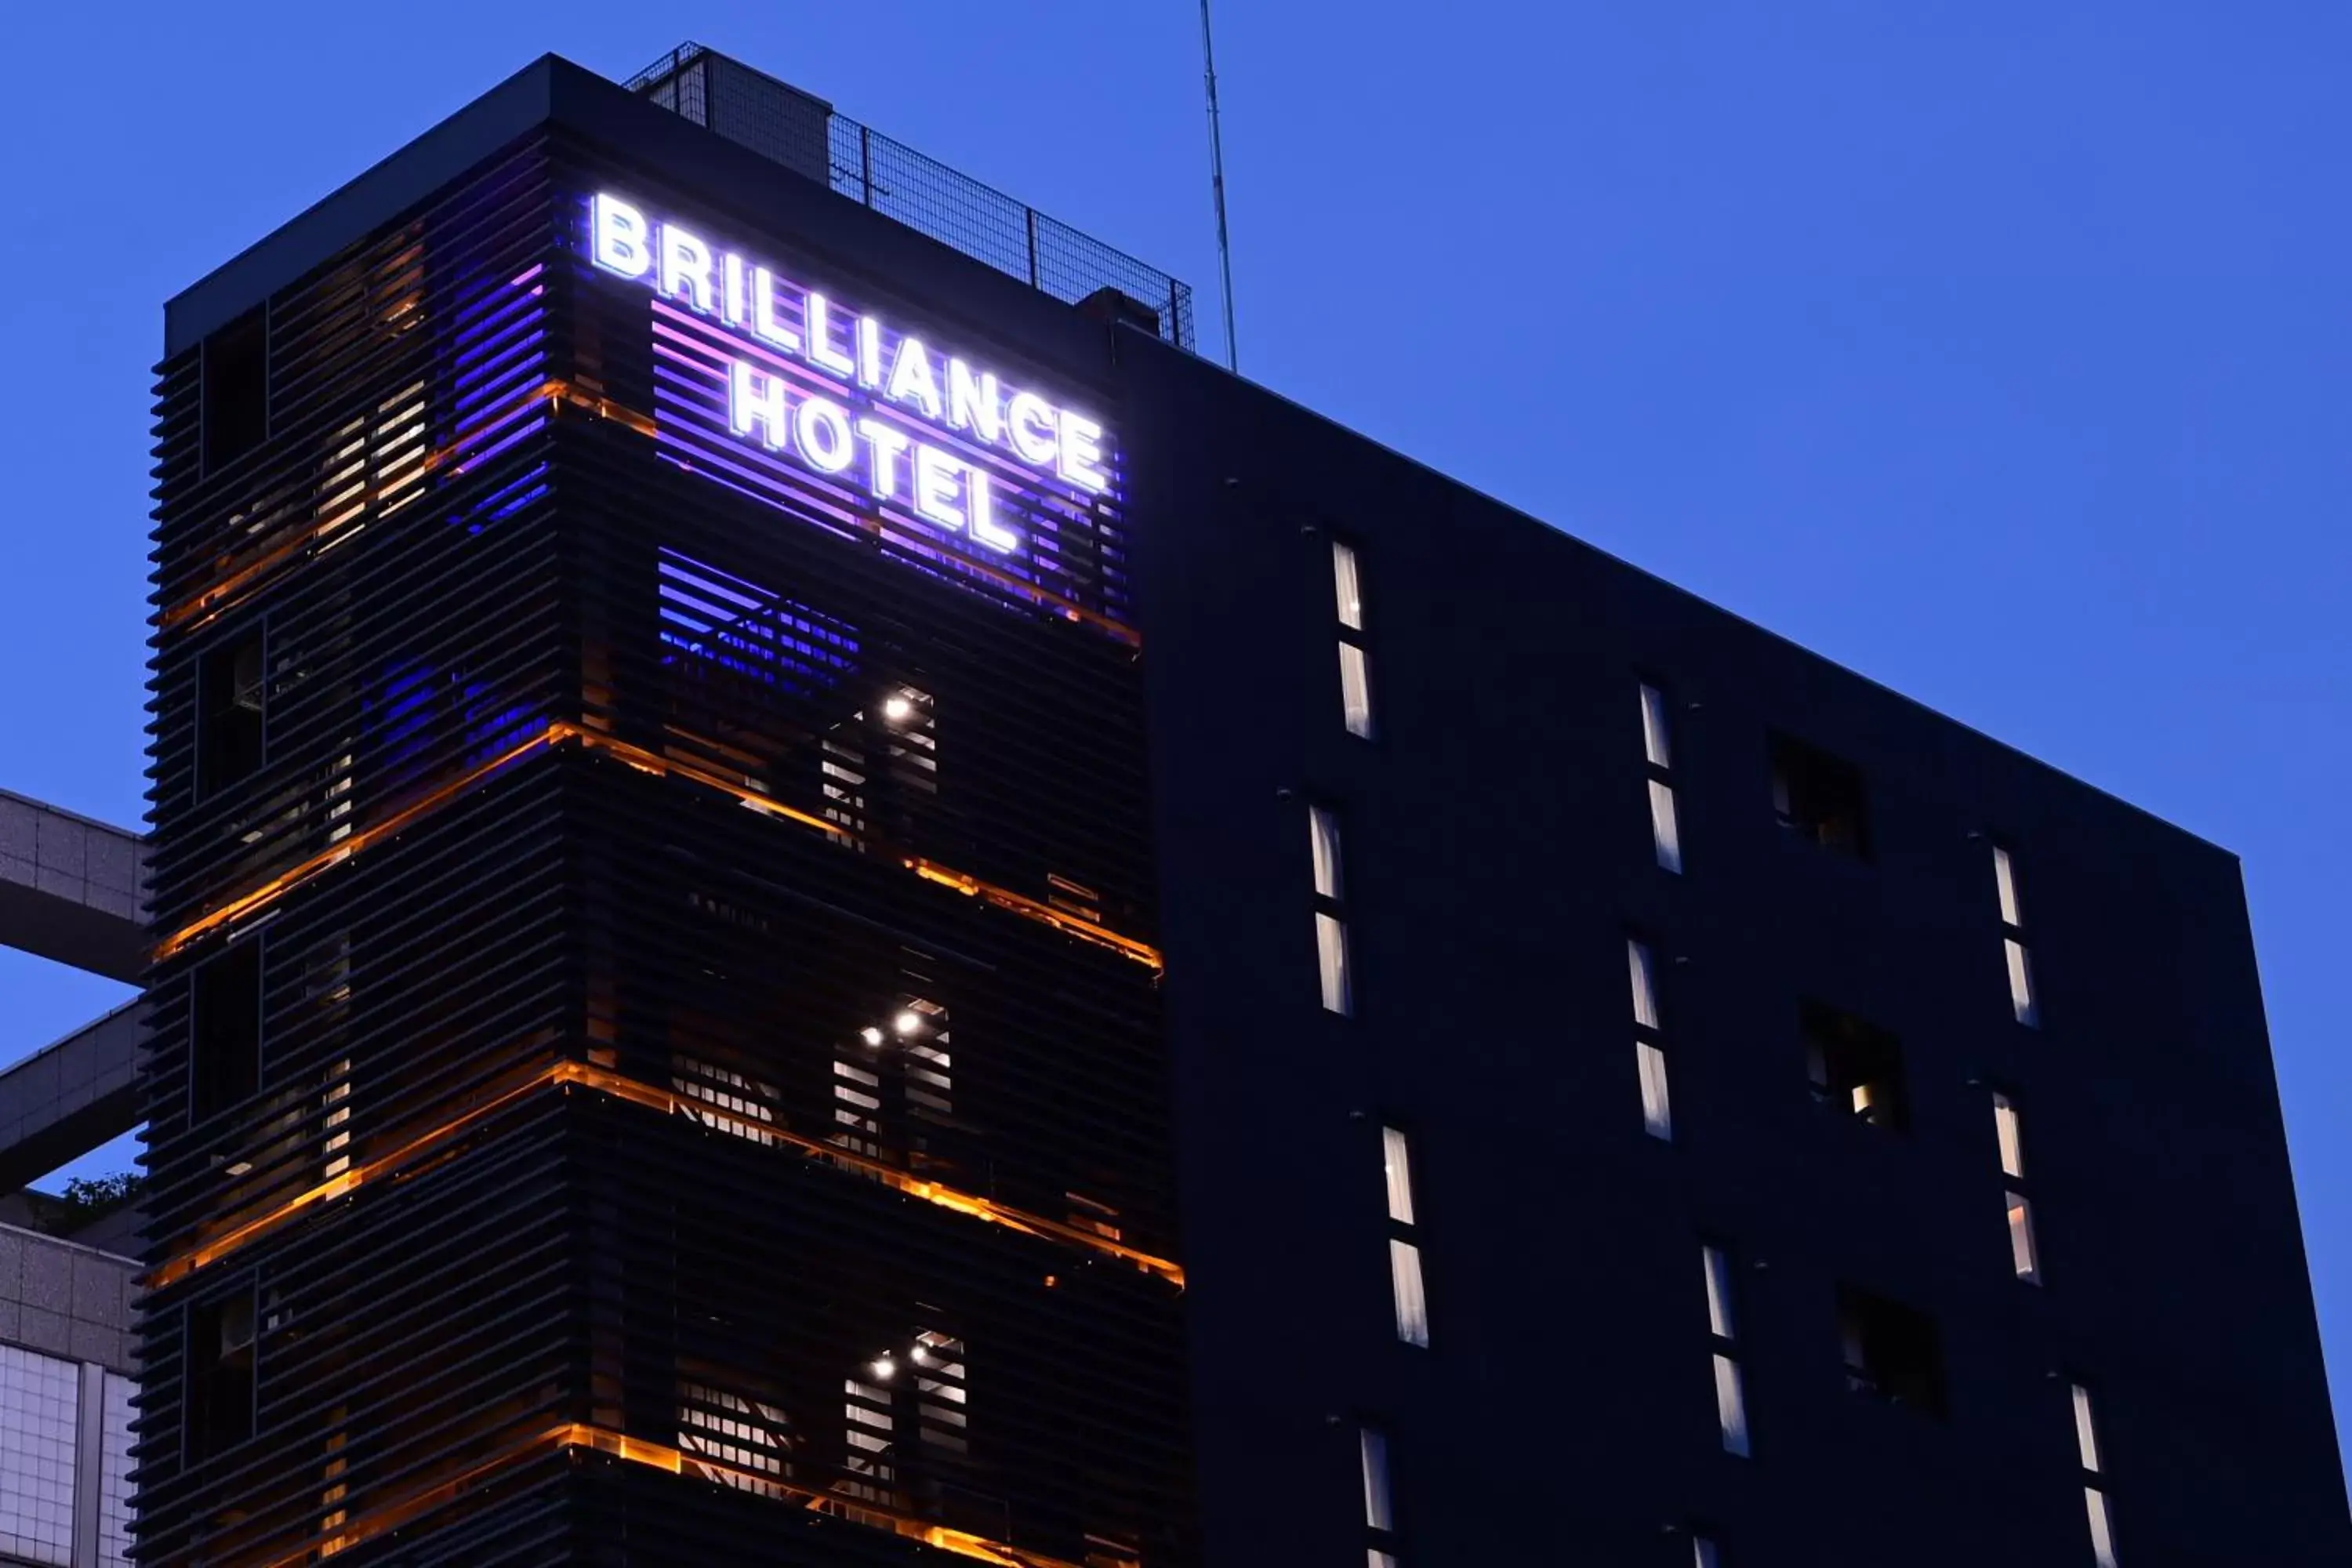 Property Building in BRILLIANCE Hotel